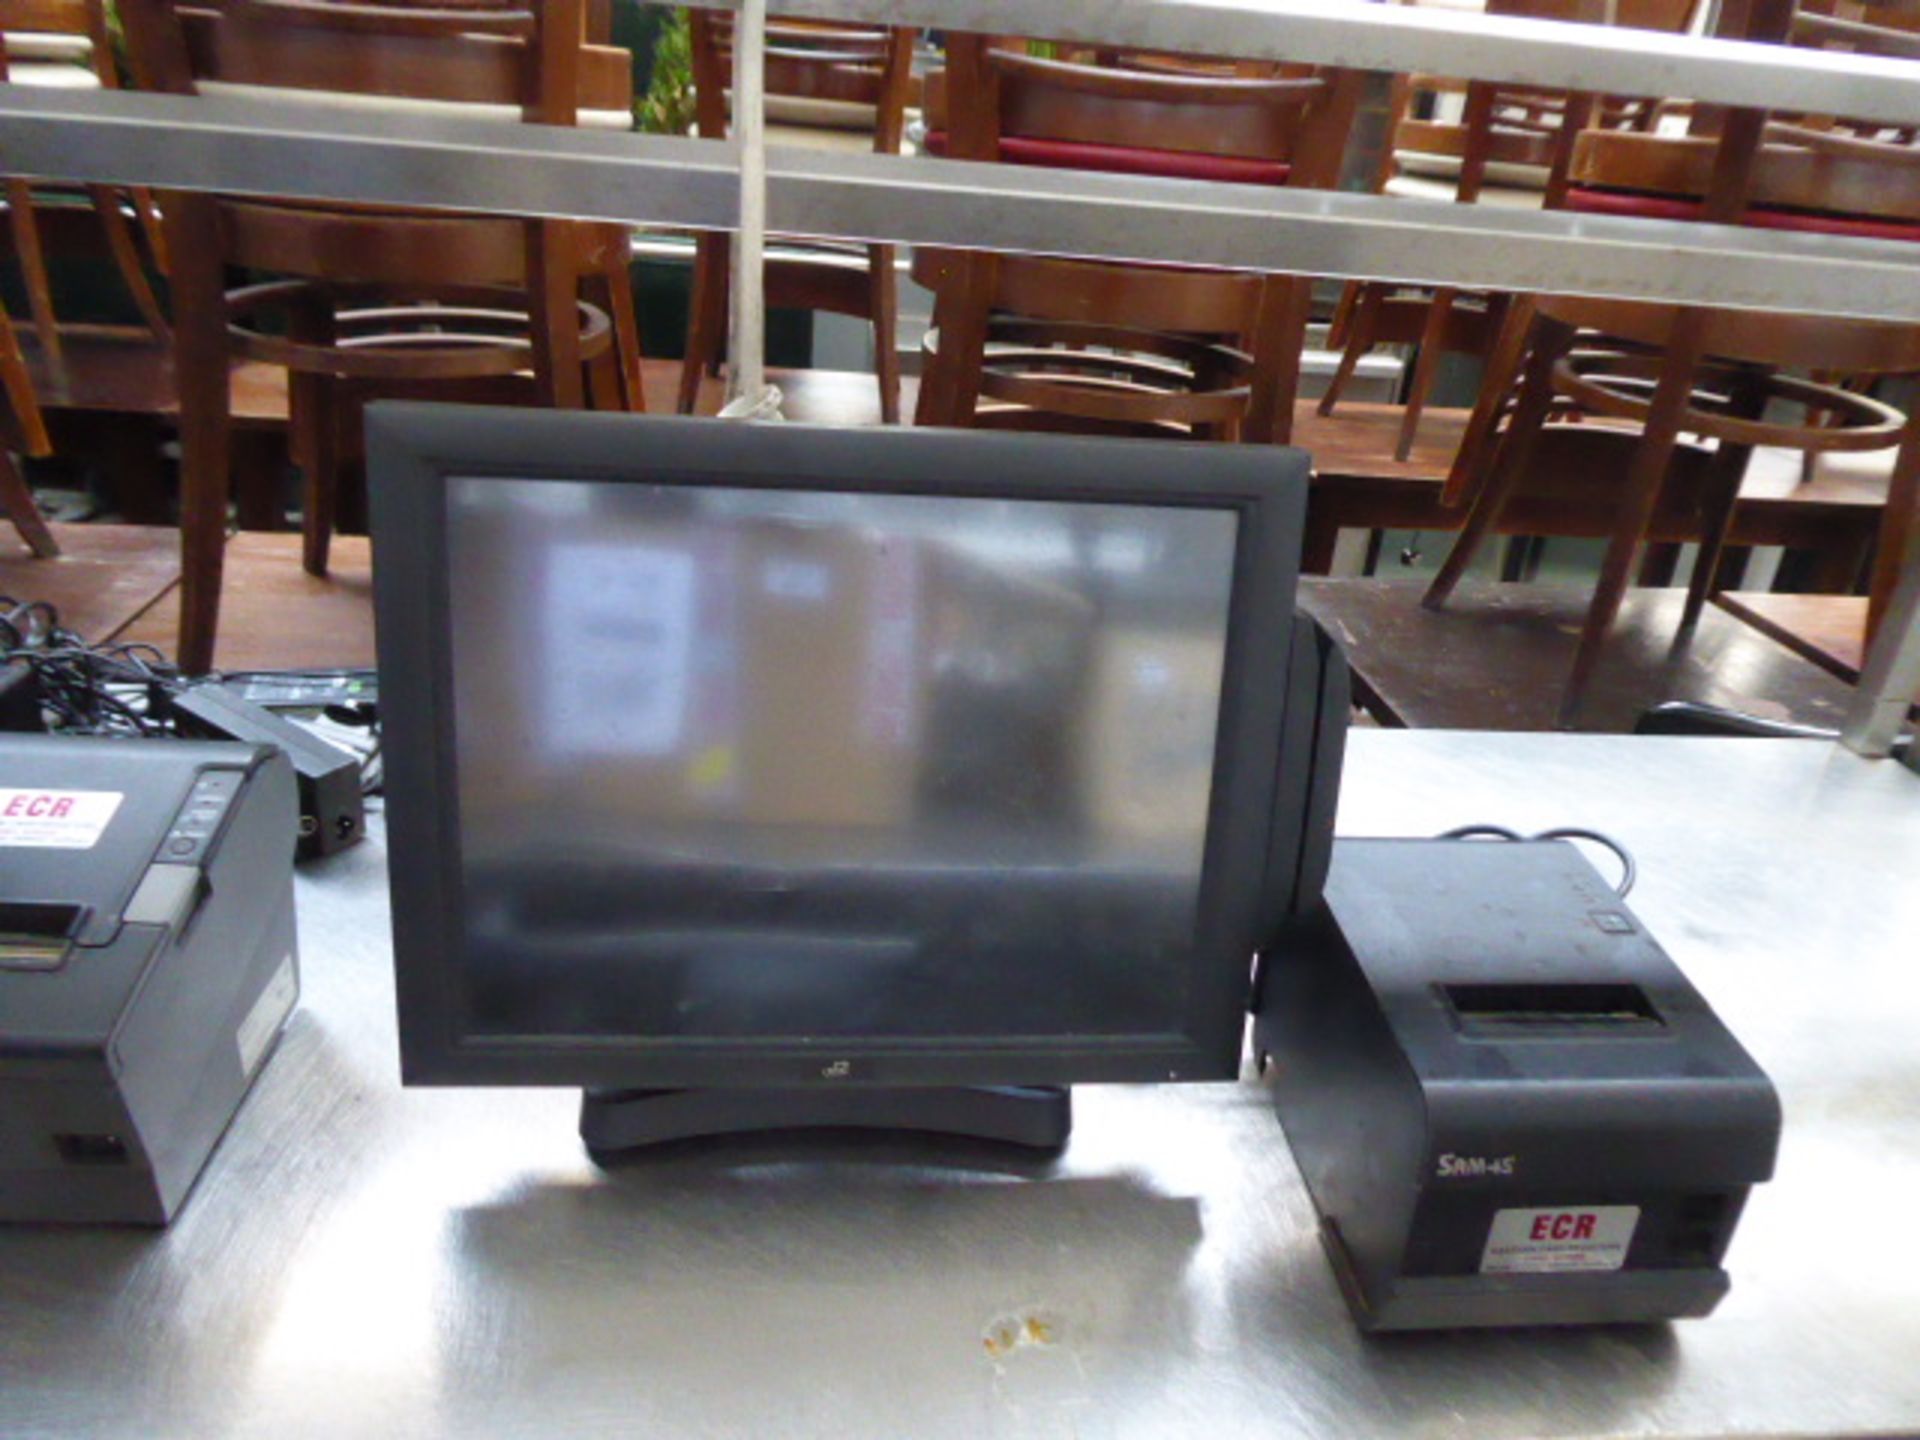 2 J2 electronic touchscreen till stations with 1 cash drawer and 2 printers - Image 3 of 4